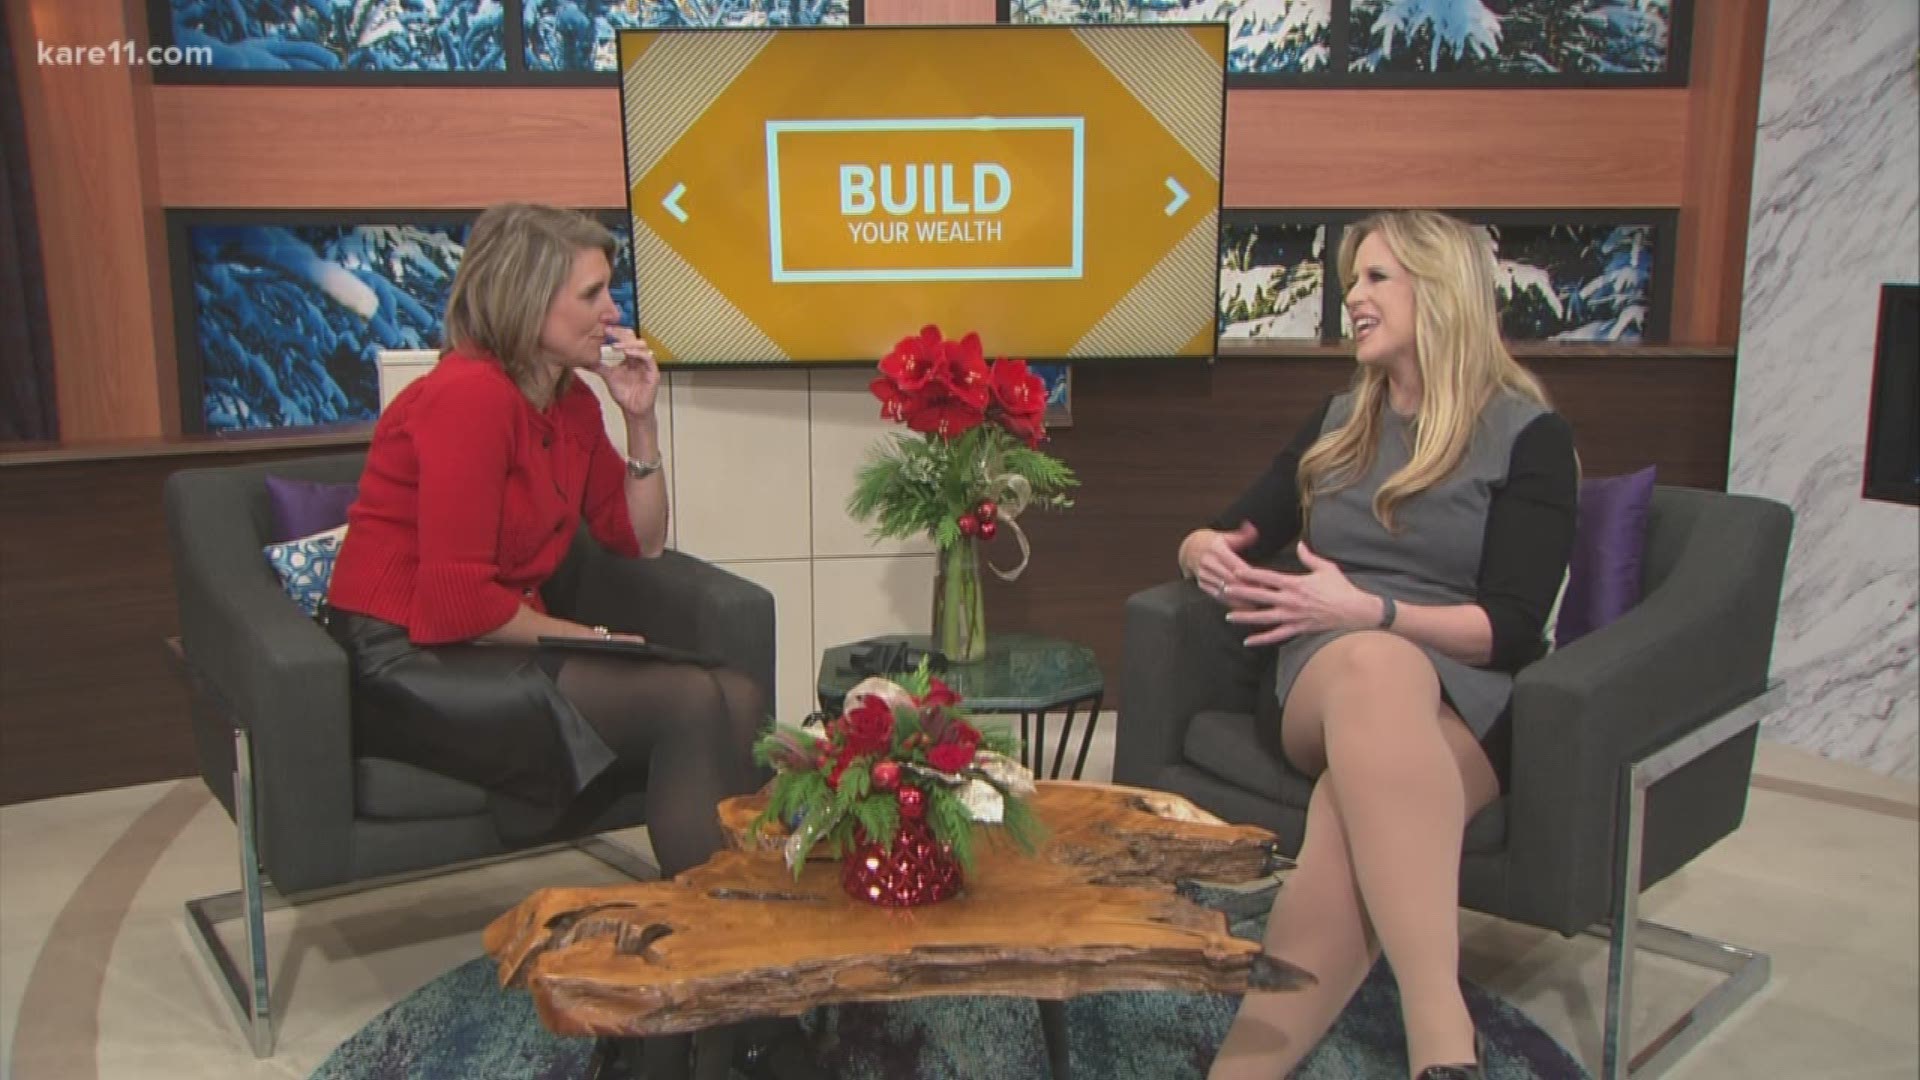 Prosperwell Financial's Nicole Middendorf shows 5 ways you can save money with the new year approaching.